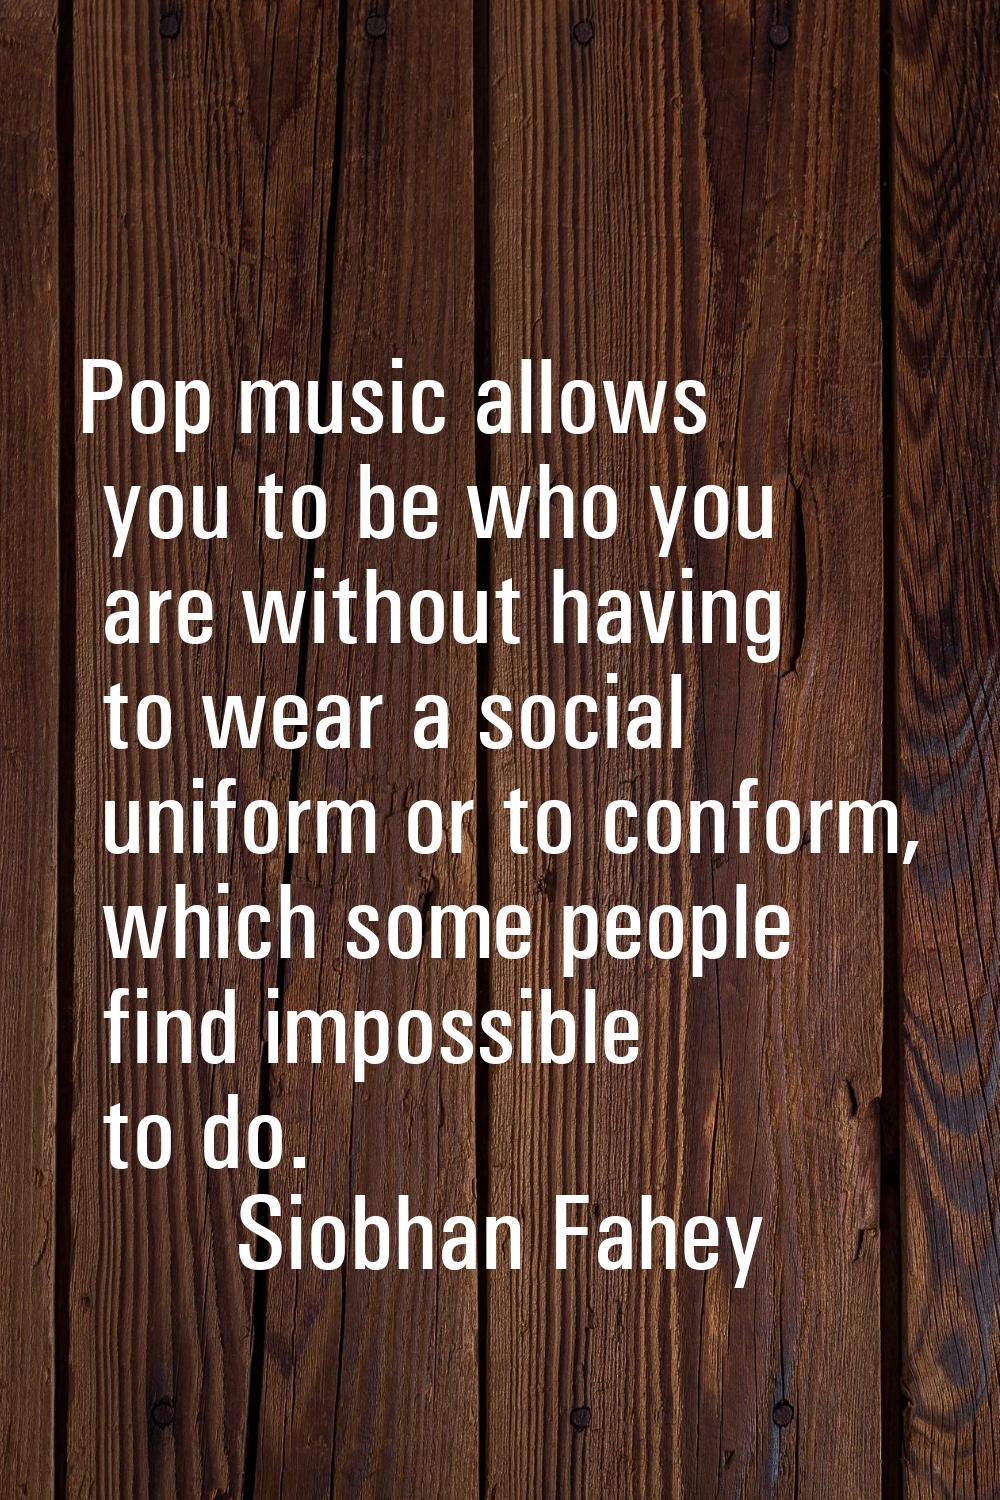 Pop music allows you to be who you are without having to wear a social uniform or to conform, which